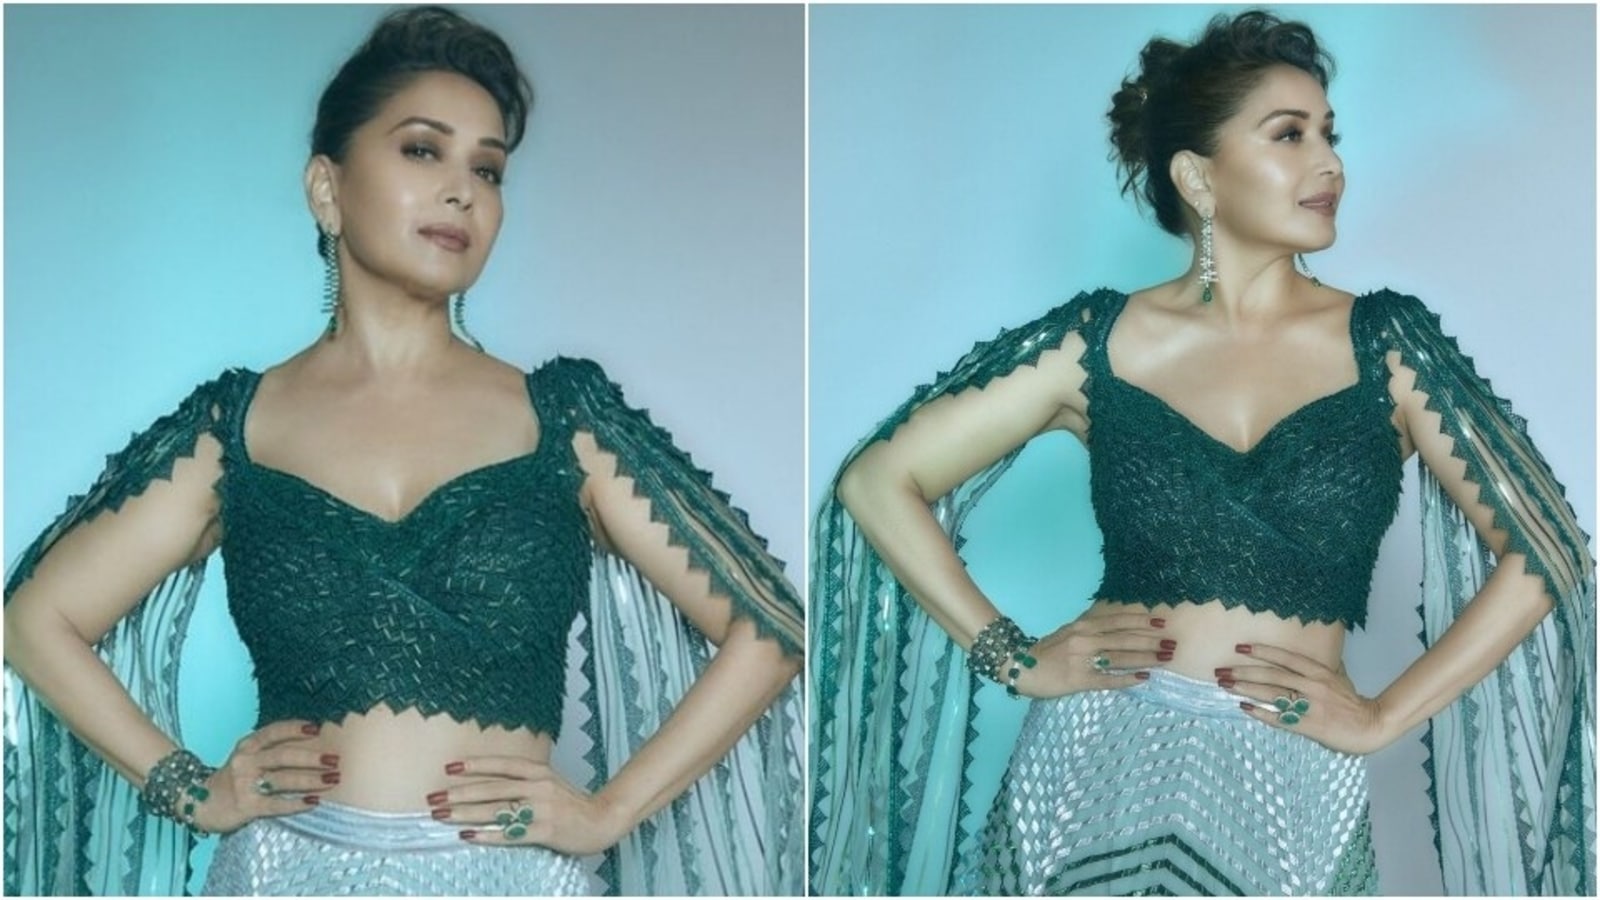 Naked Hot Sexy Madhuri Dixit - Madhuri Dixit in â‚¹2 lakh futuristic-traditional lehenga is back in action  and how | Fashion Trends - Hindustan Times